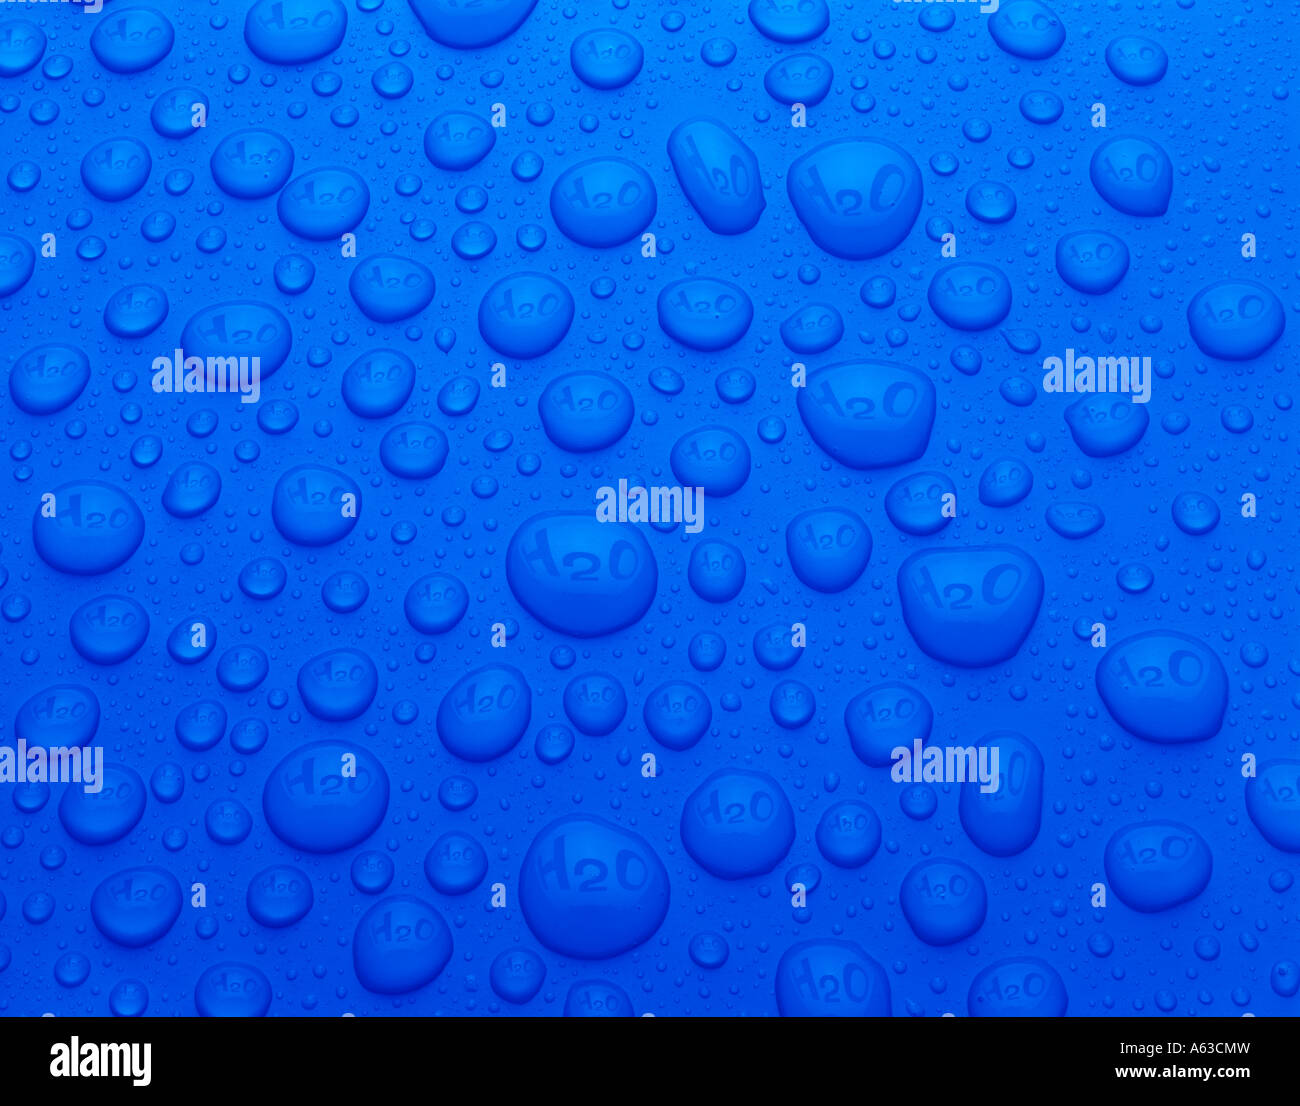 BLUE WATER DROPS ON BLUE BACKGROUND REFLECTING THE CHEMICAL SYMBOL H20 Stock Photo